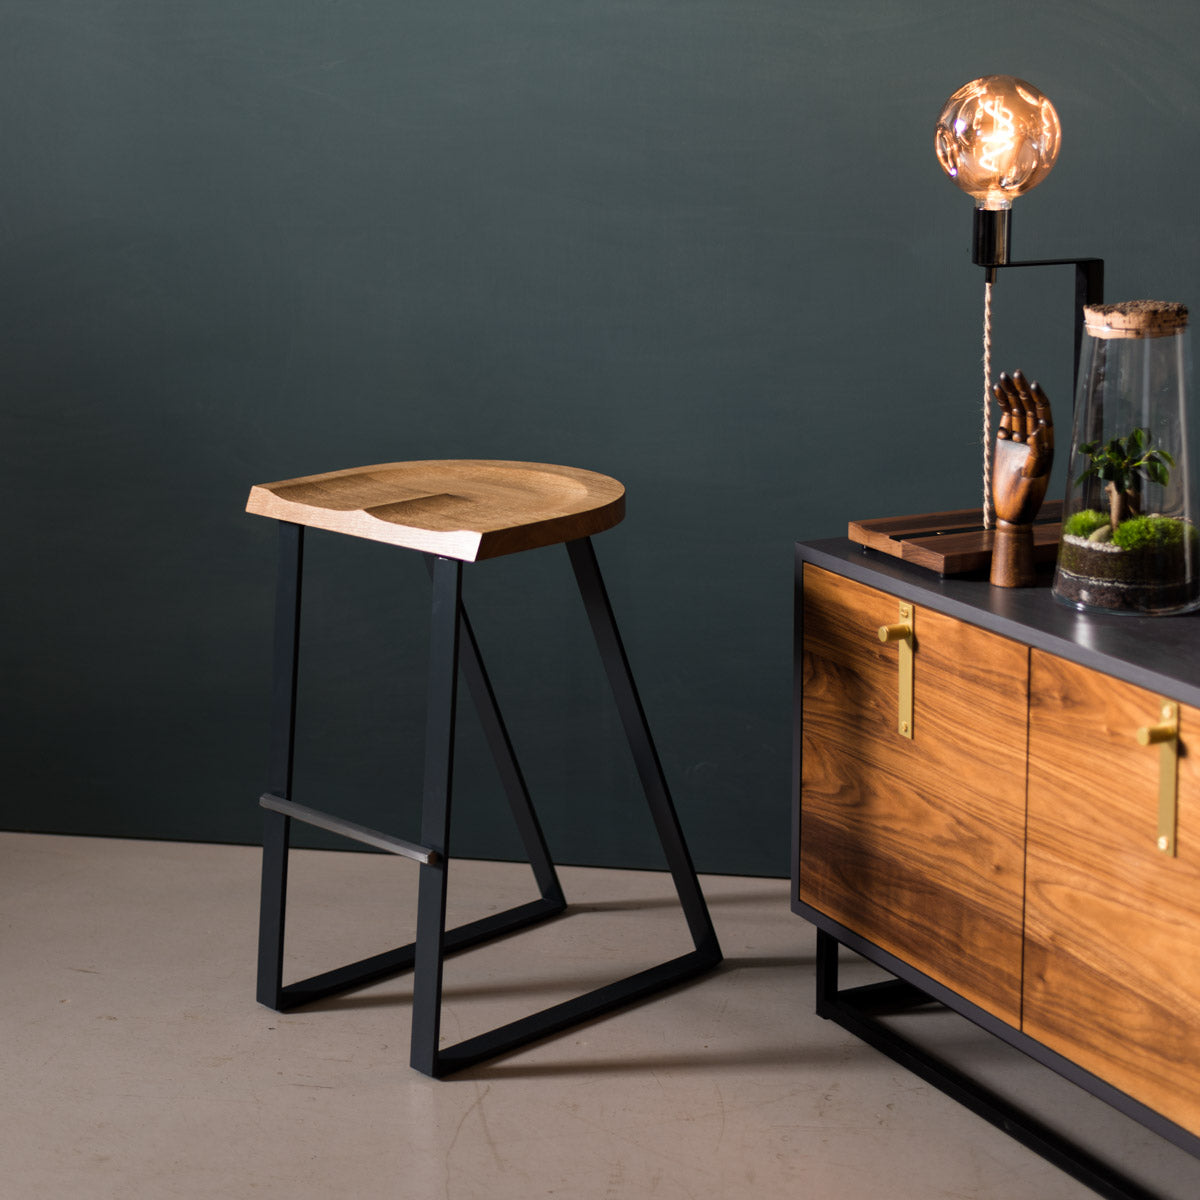 An image of the Oak Counter Stool, Angle product available from Koda Studios